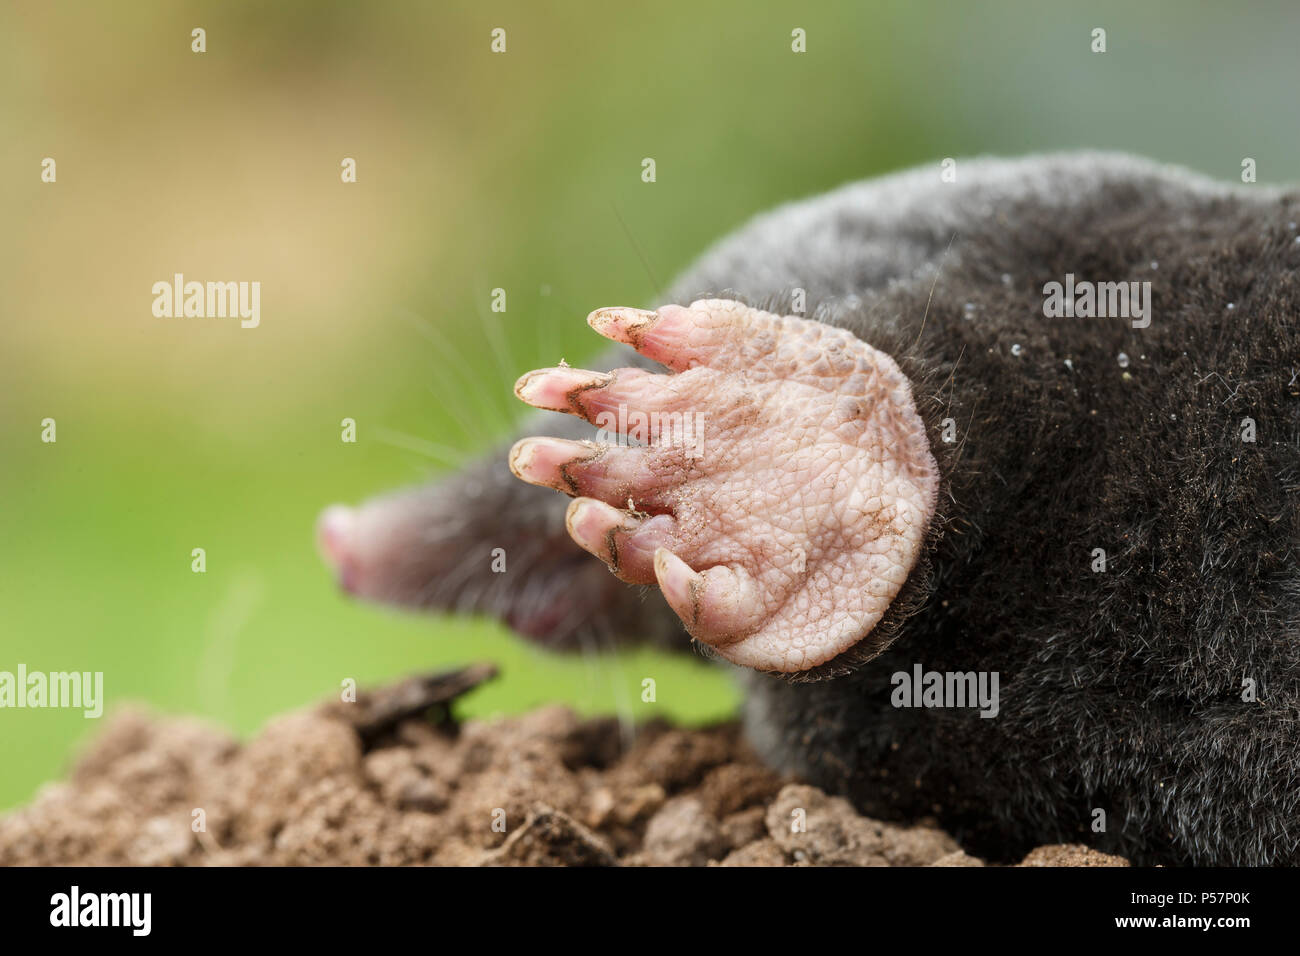 European Mole, Talpa europaea, showing enlarged front feet used for burrowing. Monmouthshire, Wales, UK Stock Photo